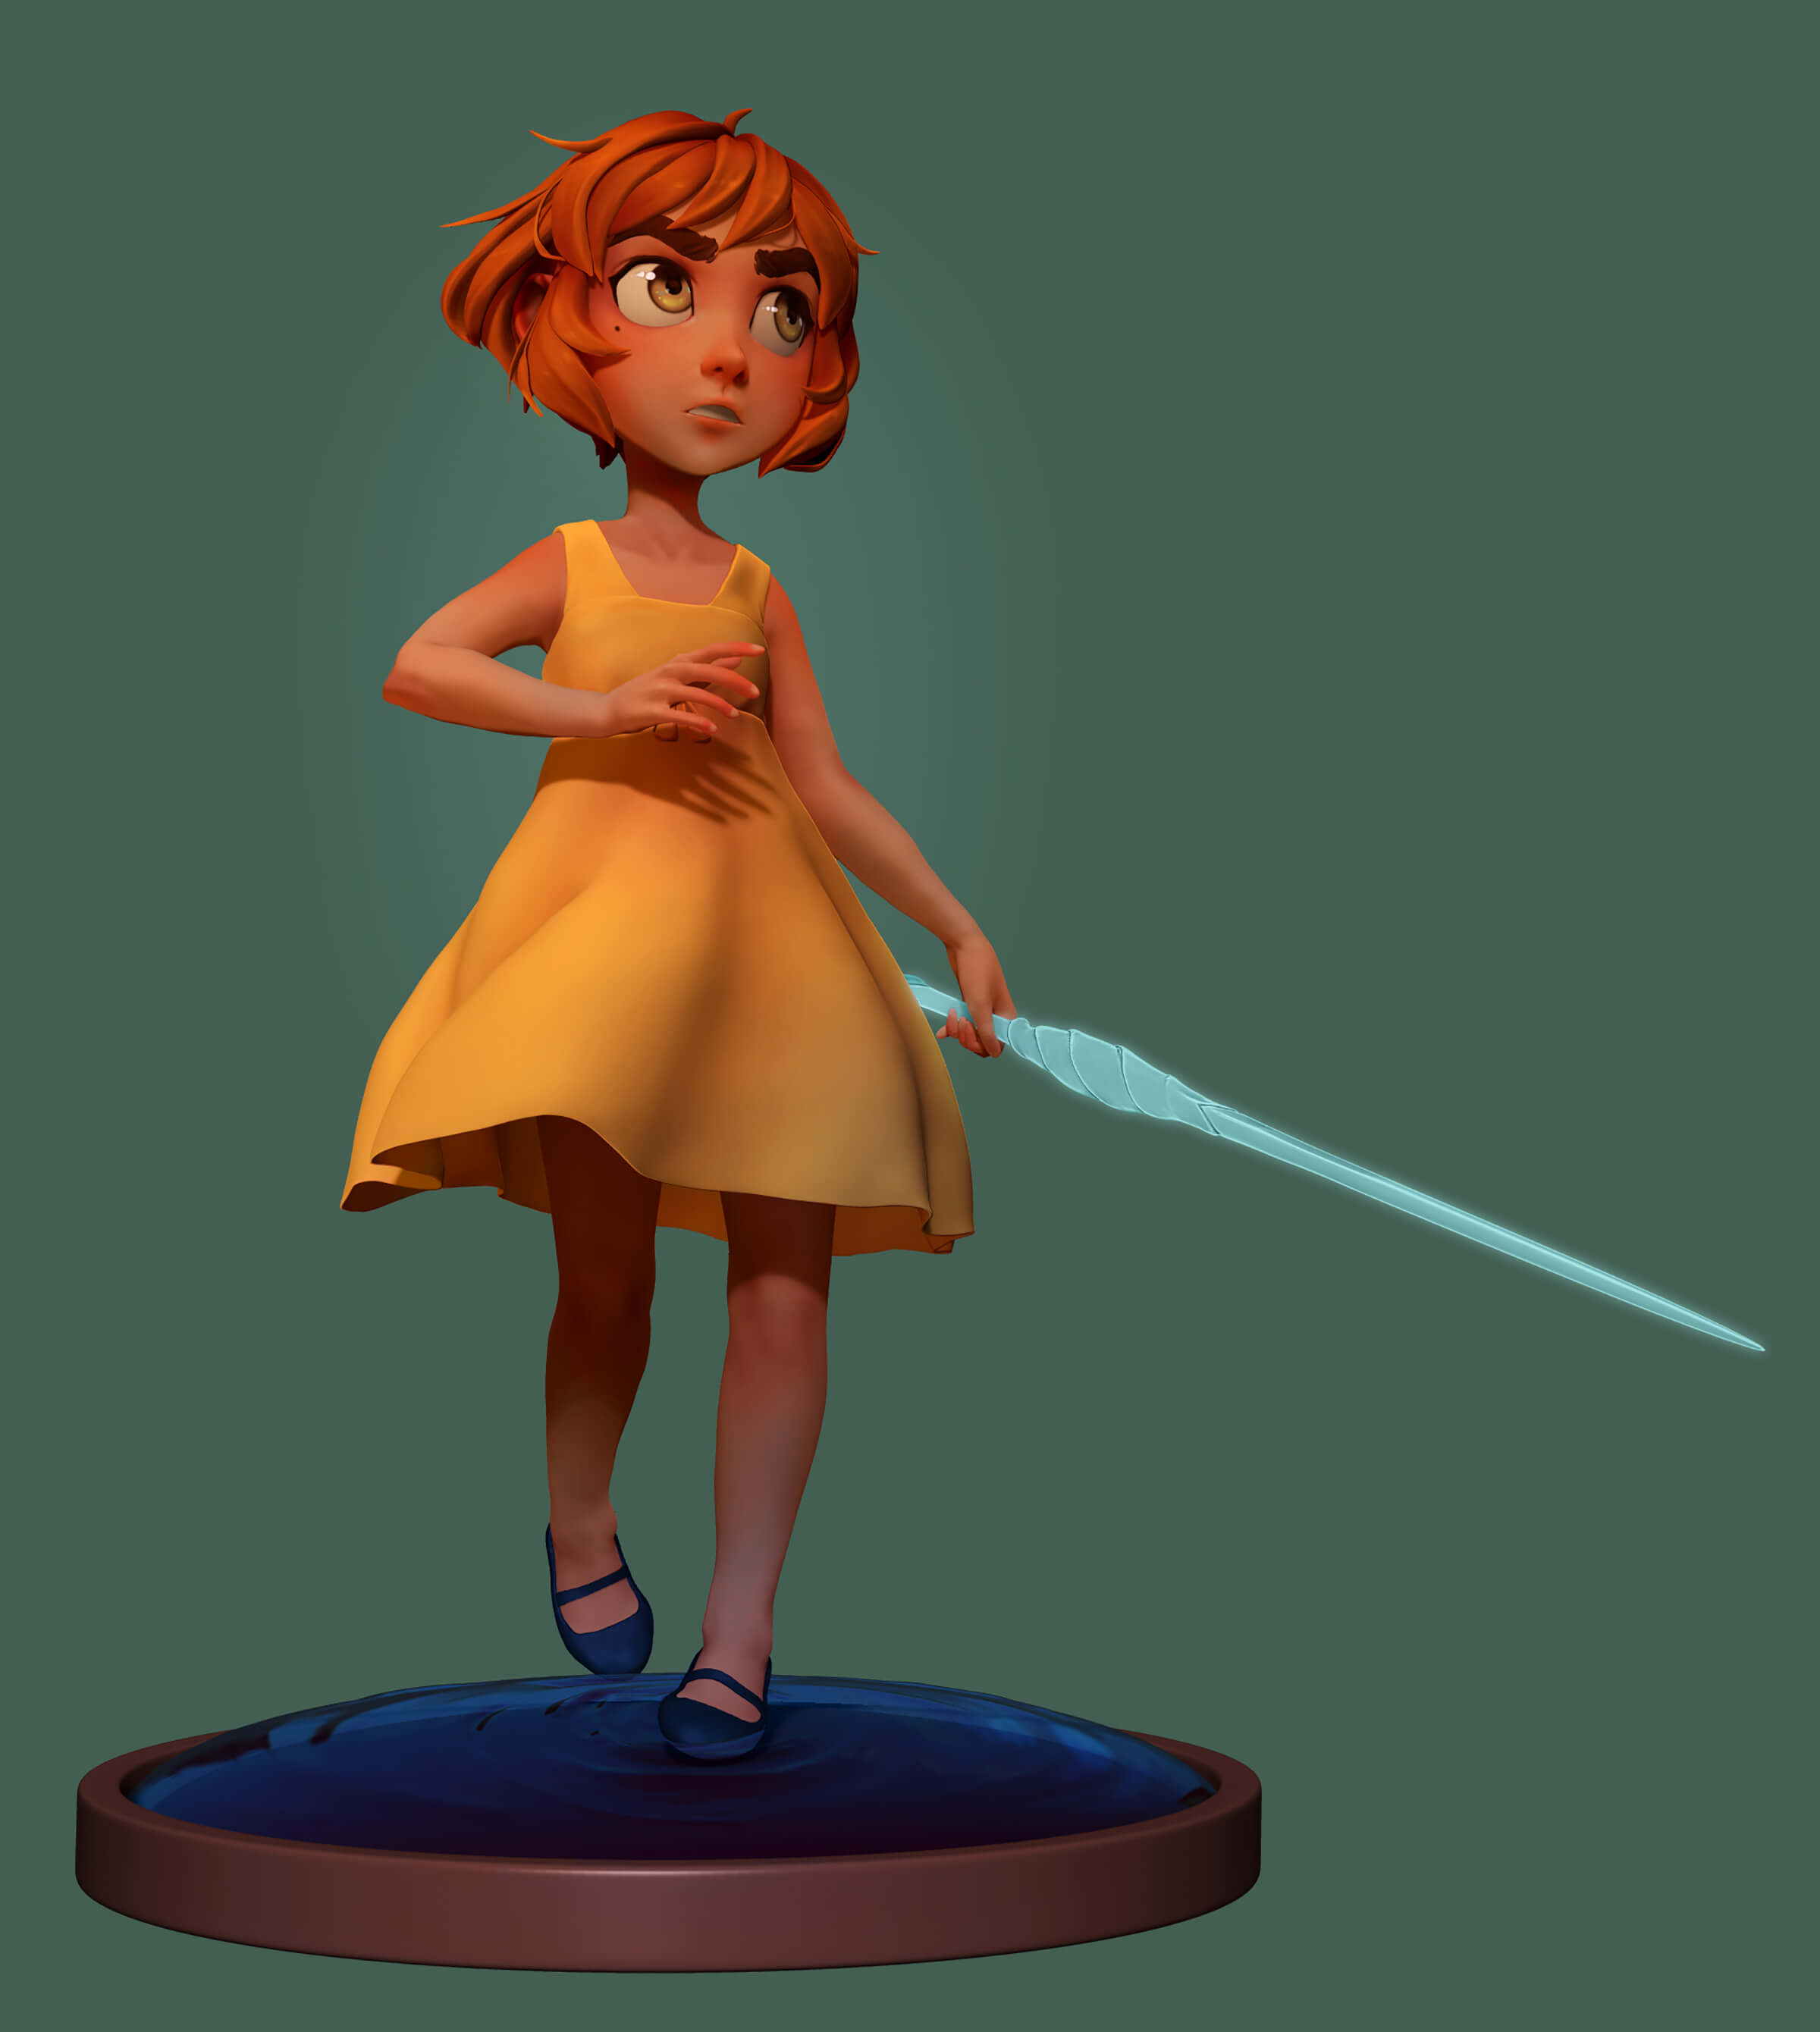 computer-generated 3D model of a small, red-headed girl in a yellow dress carrying a crystal sword